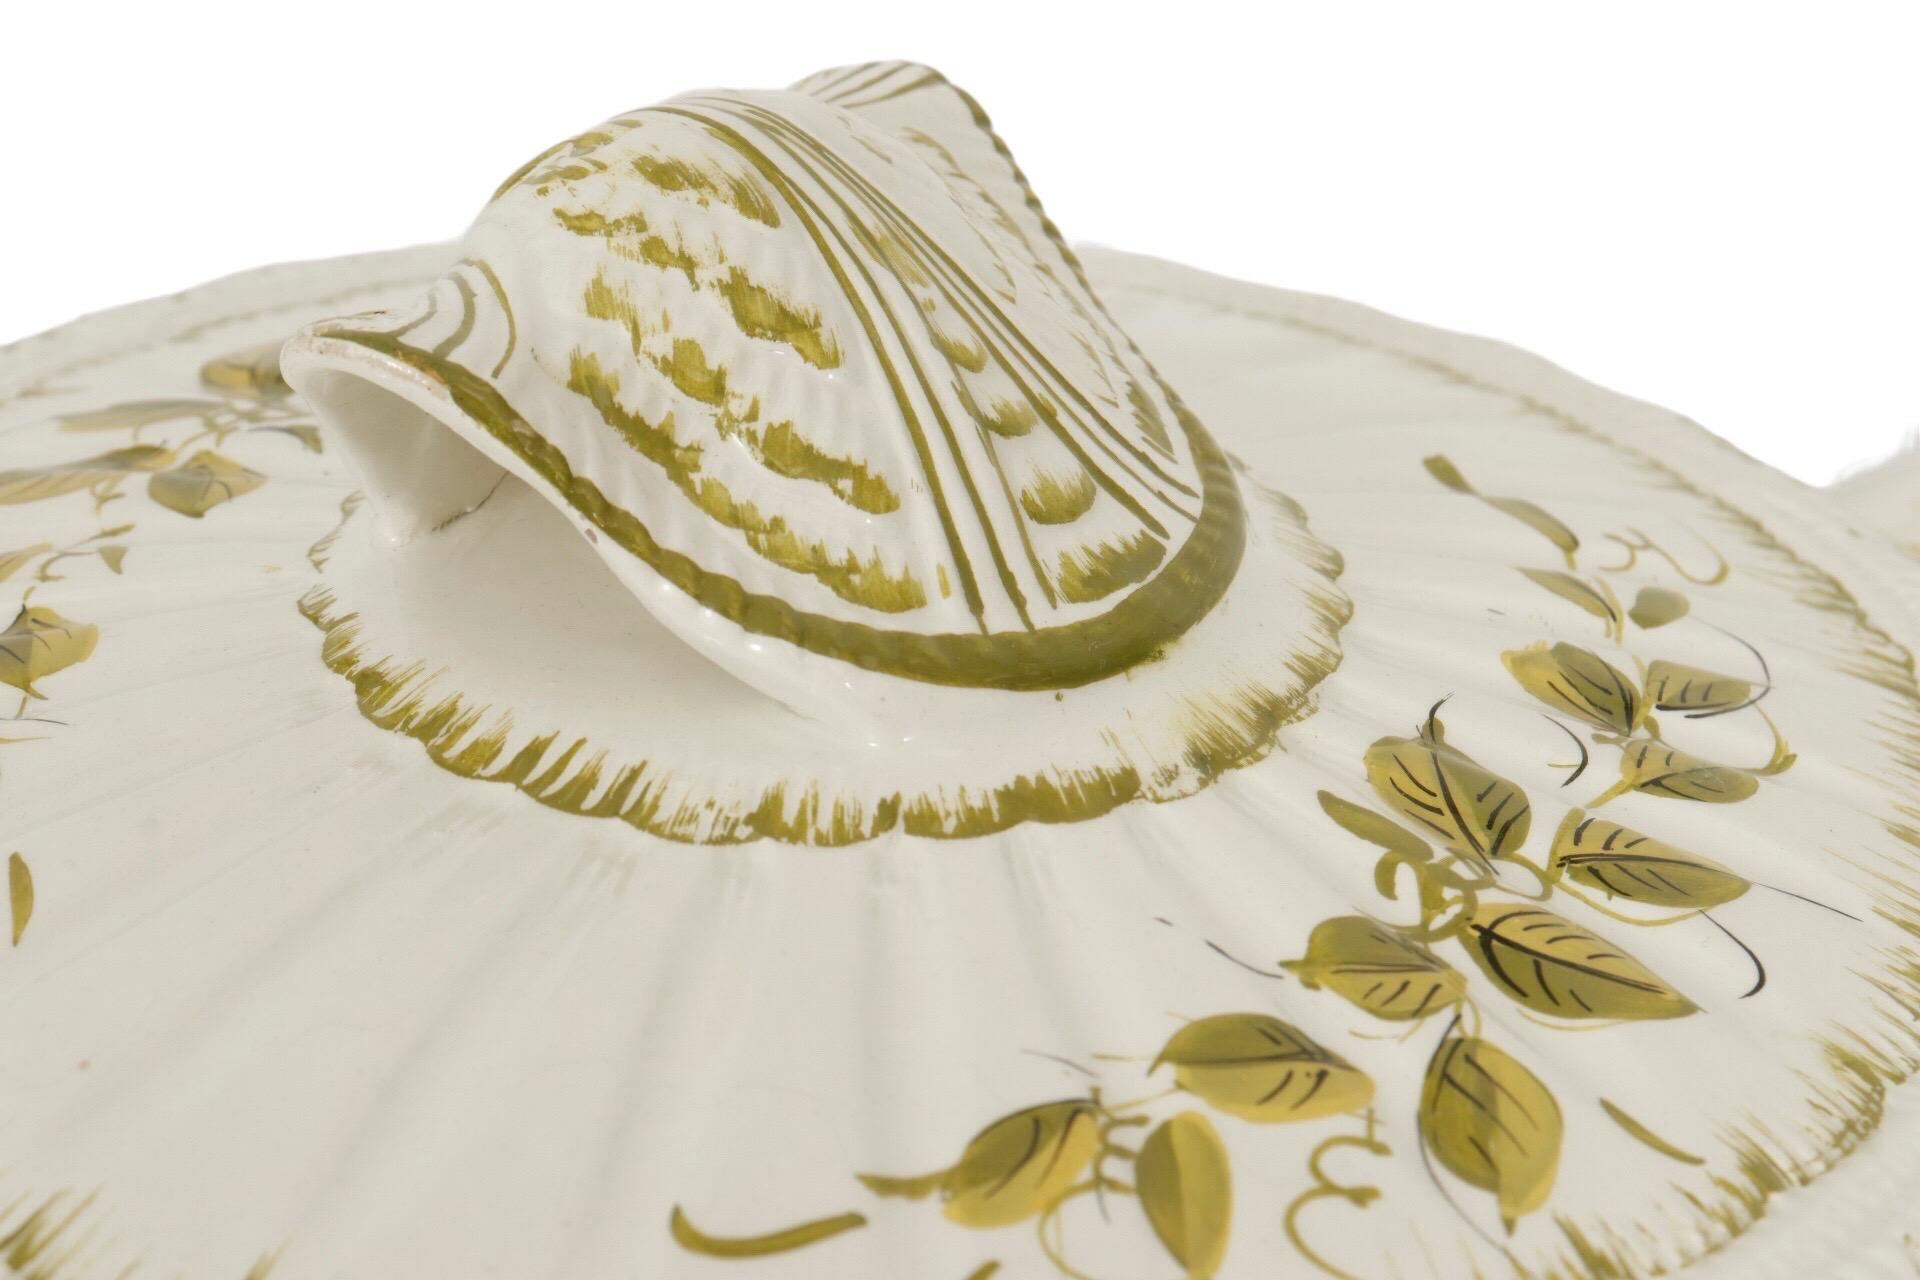 A large Italian hand painted ceramic soup tureen. The lid, ladle, tureen and charger are white and delicately decorated with hand painted green vine leaves and scallop shells. Marked underneath with a hand signed limited edition number “46/7” and